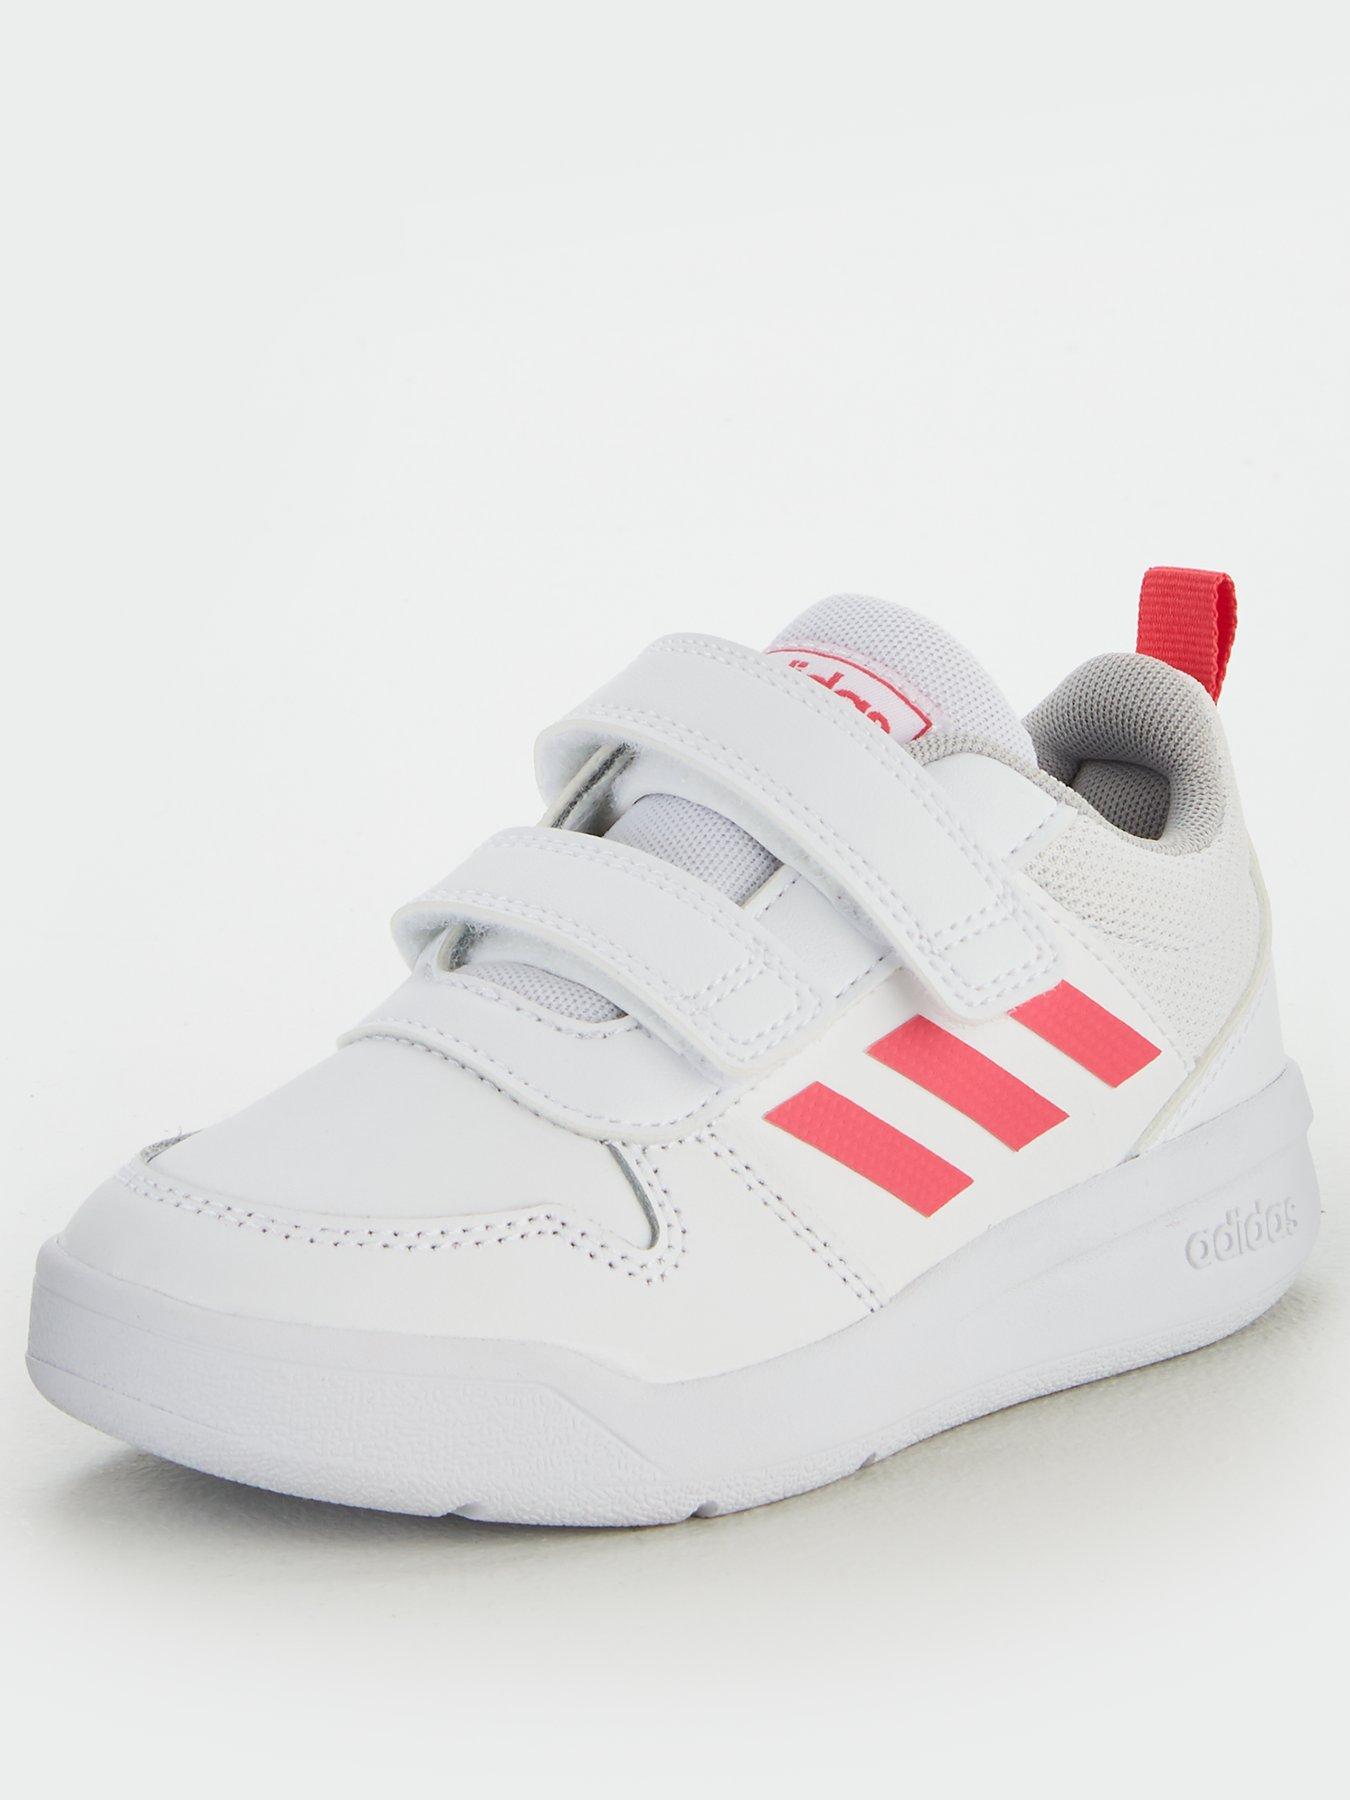 childrens adidas trainers